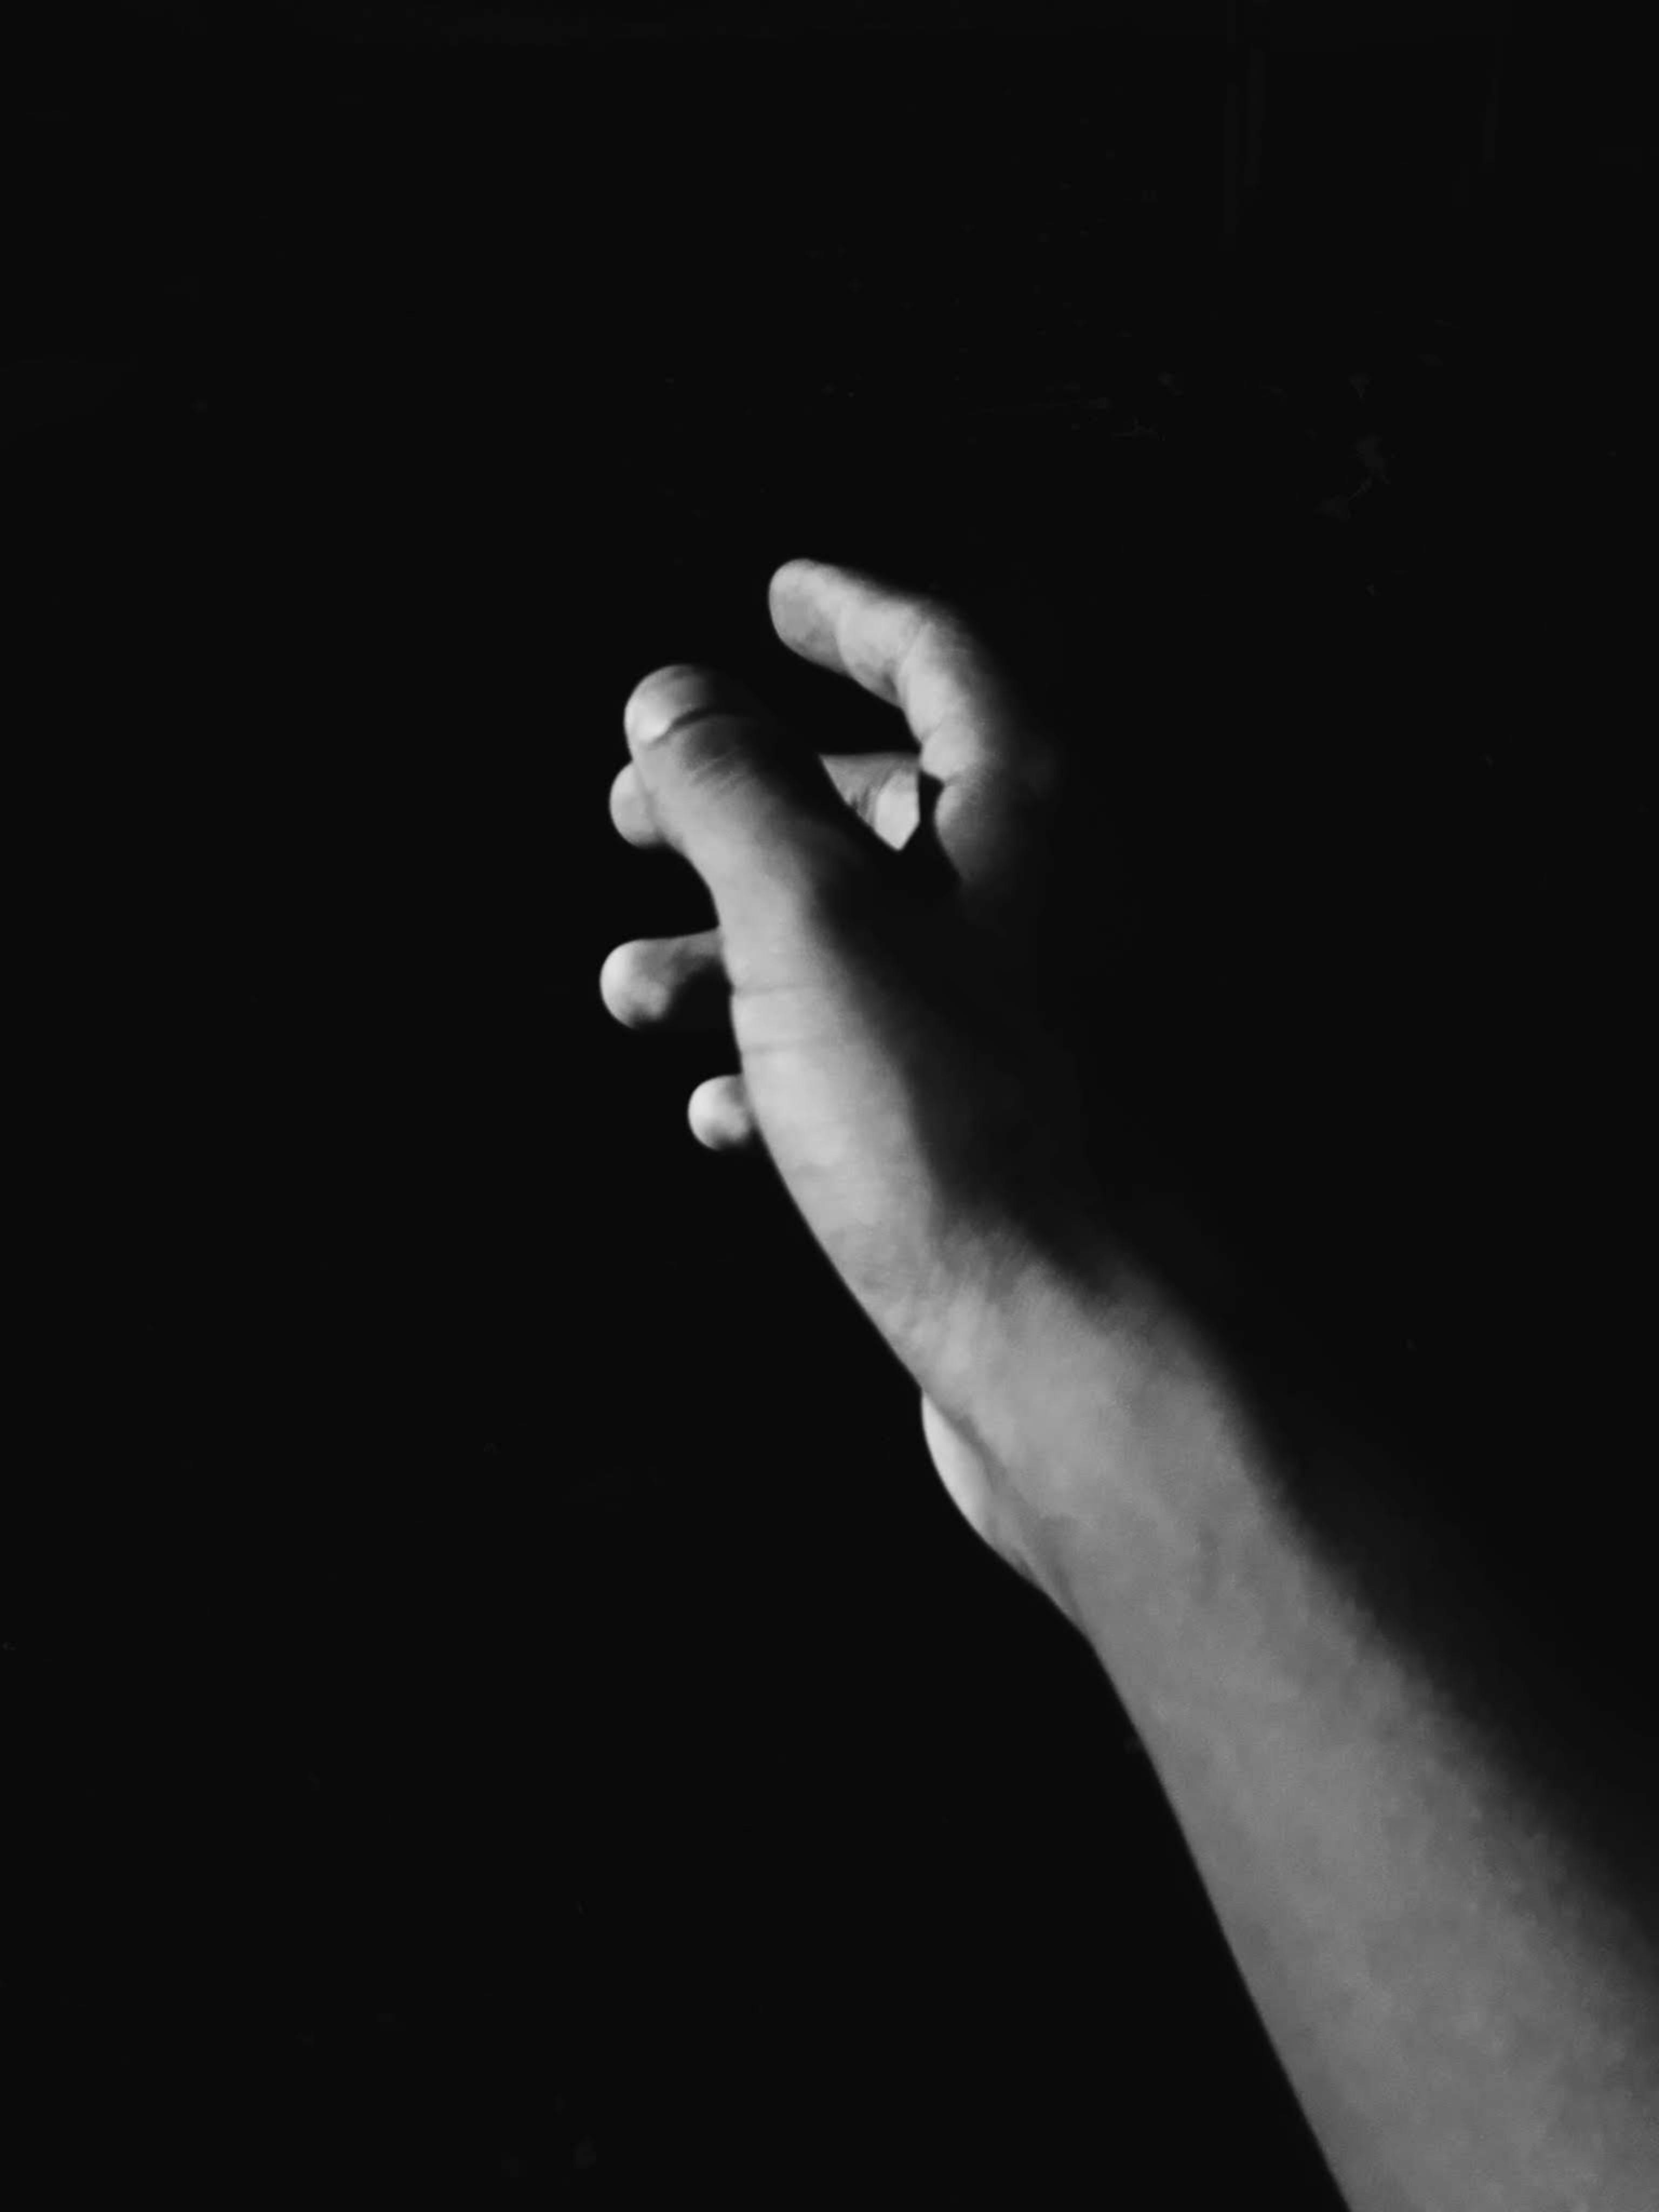 Grayscale Photo of Hand Reaching Out Against Black Background · Free